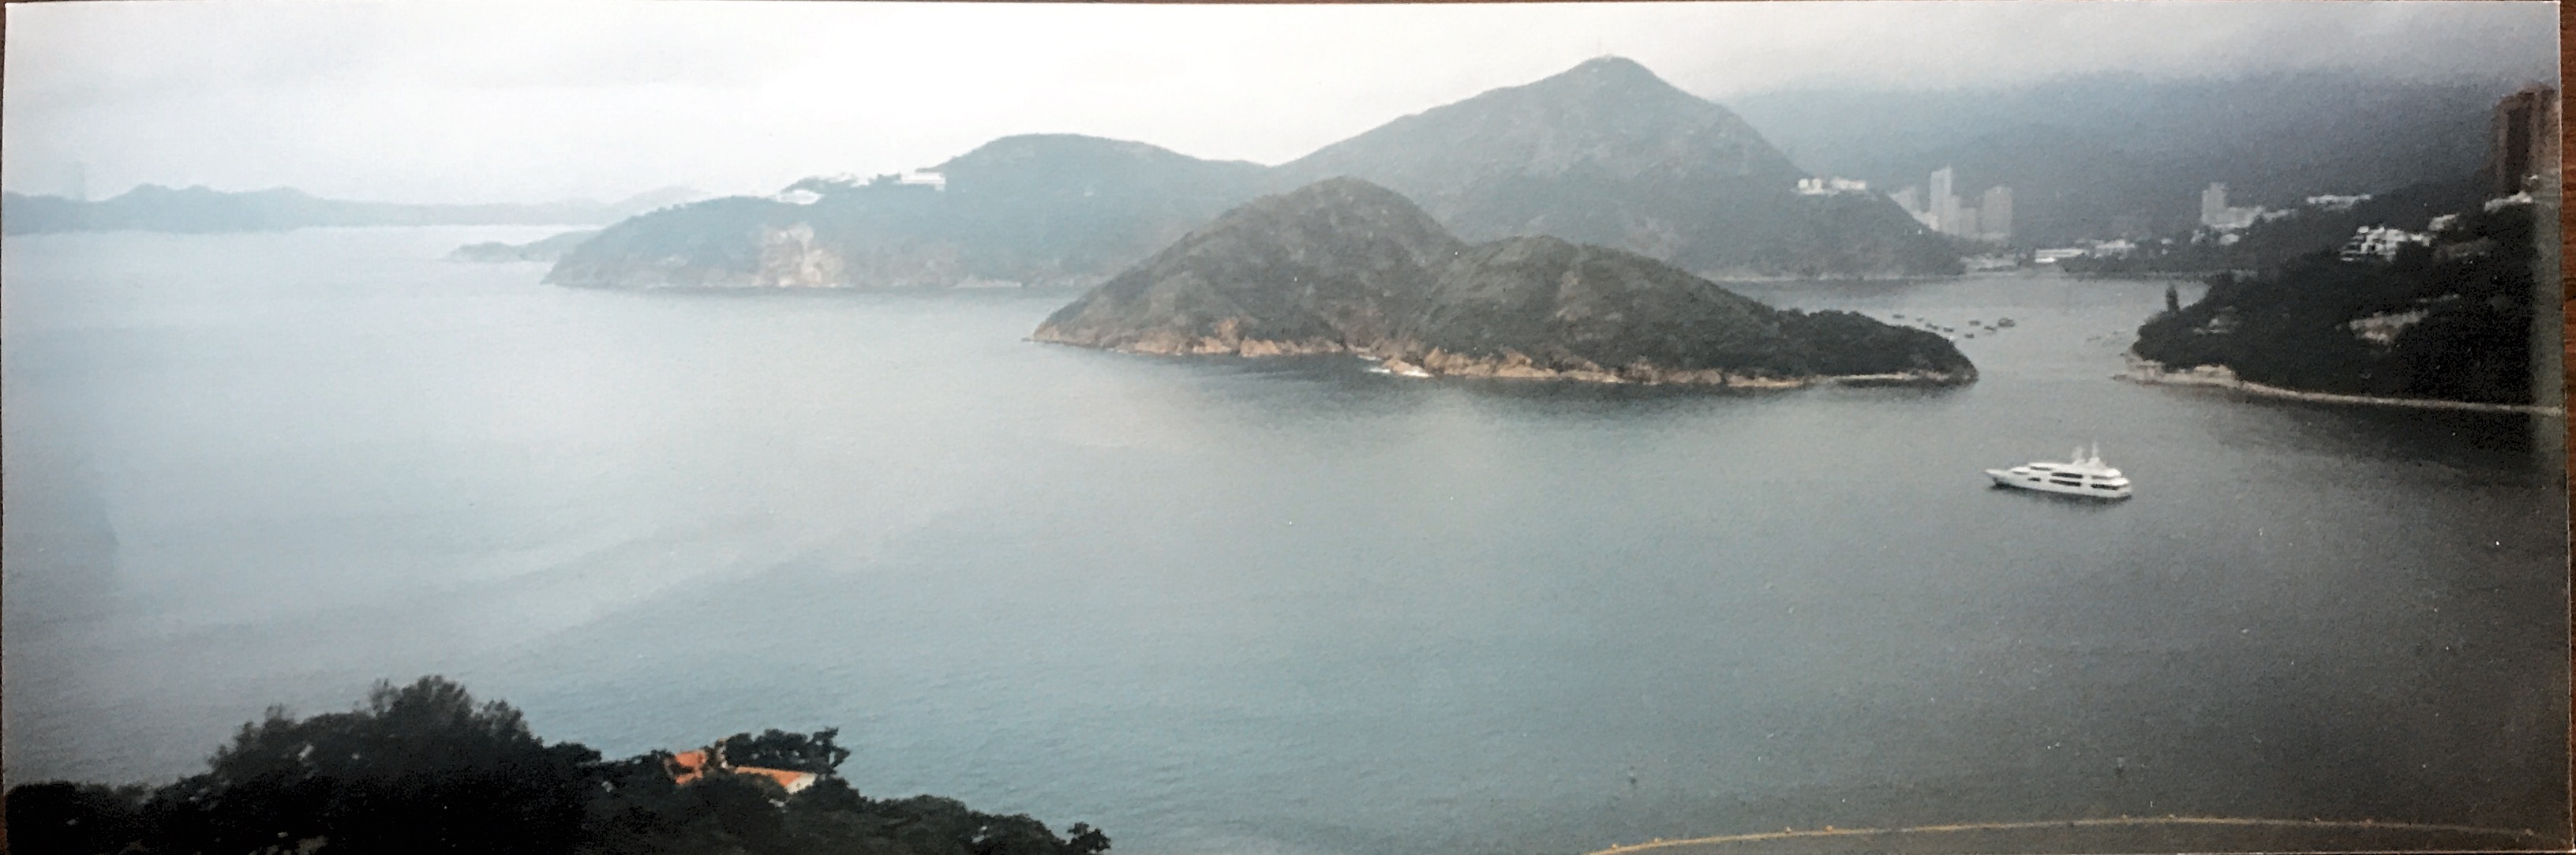 1997 - Panoramic view from our apartment window on South Bay Rd, Repulse Bay, in Hong Kong